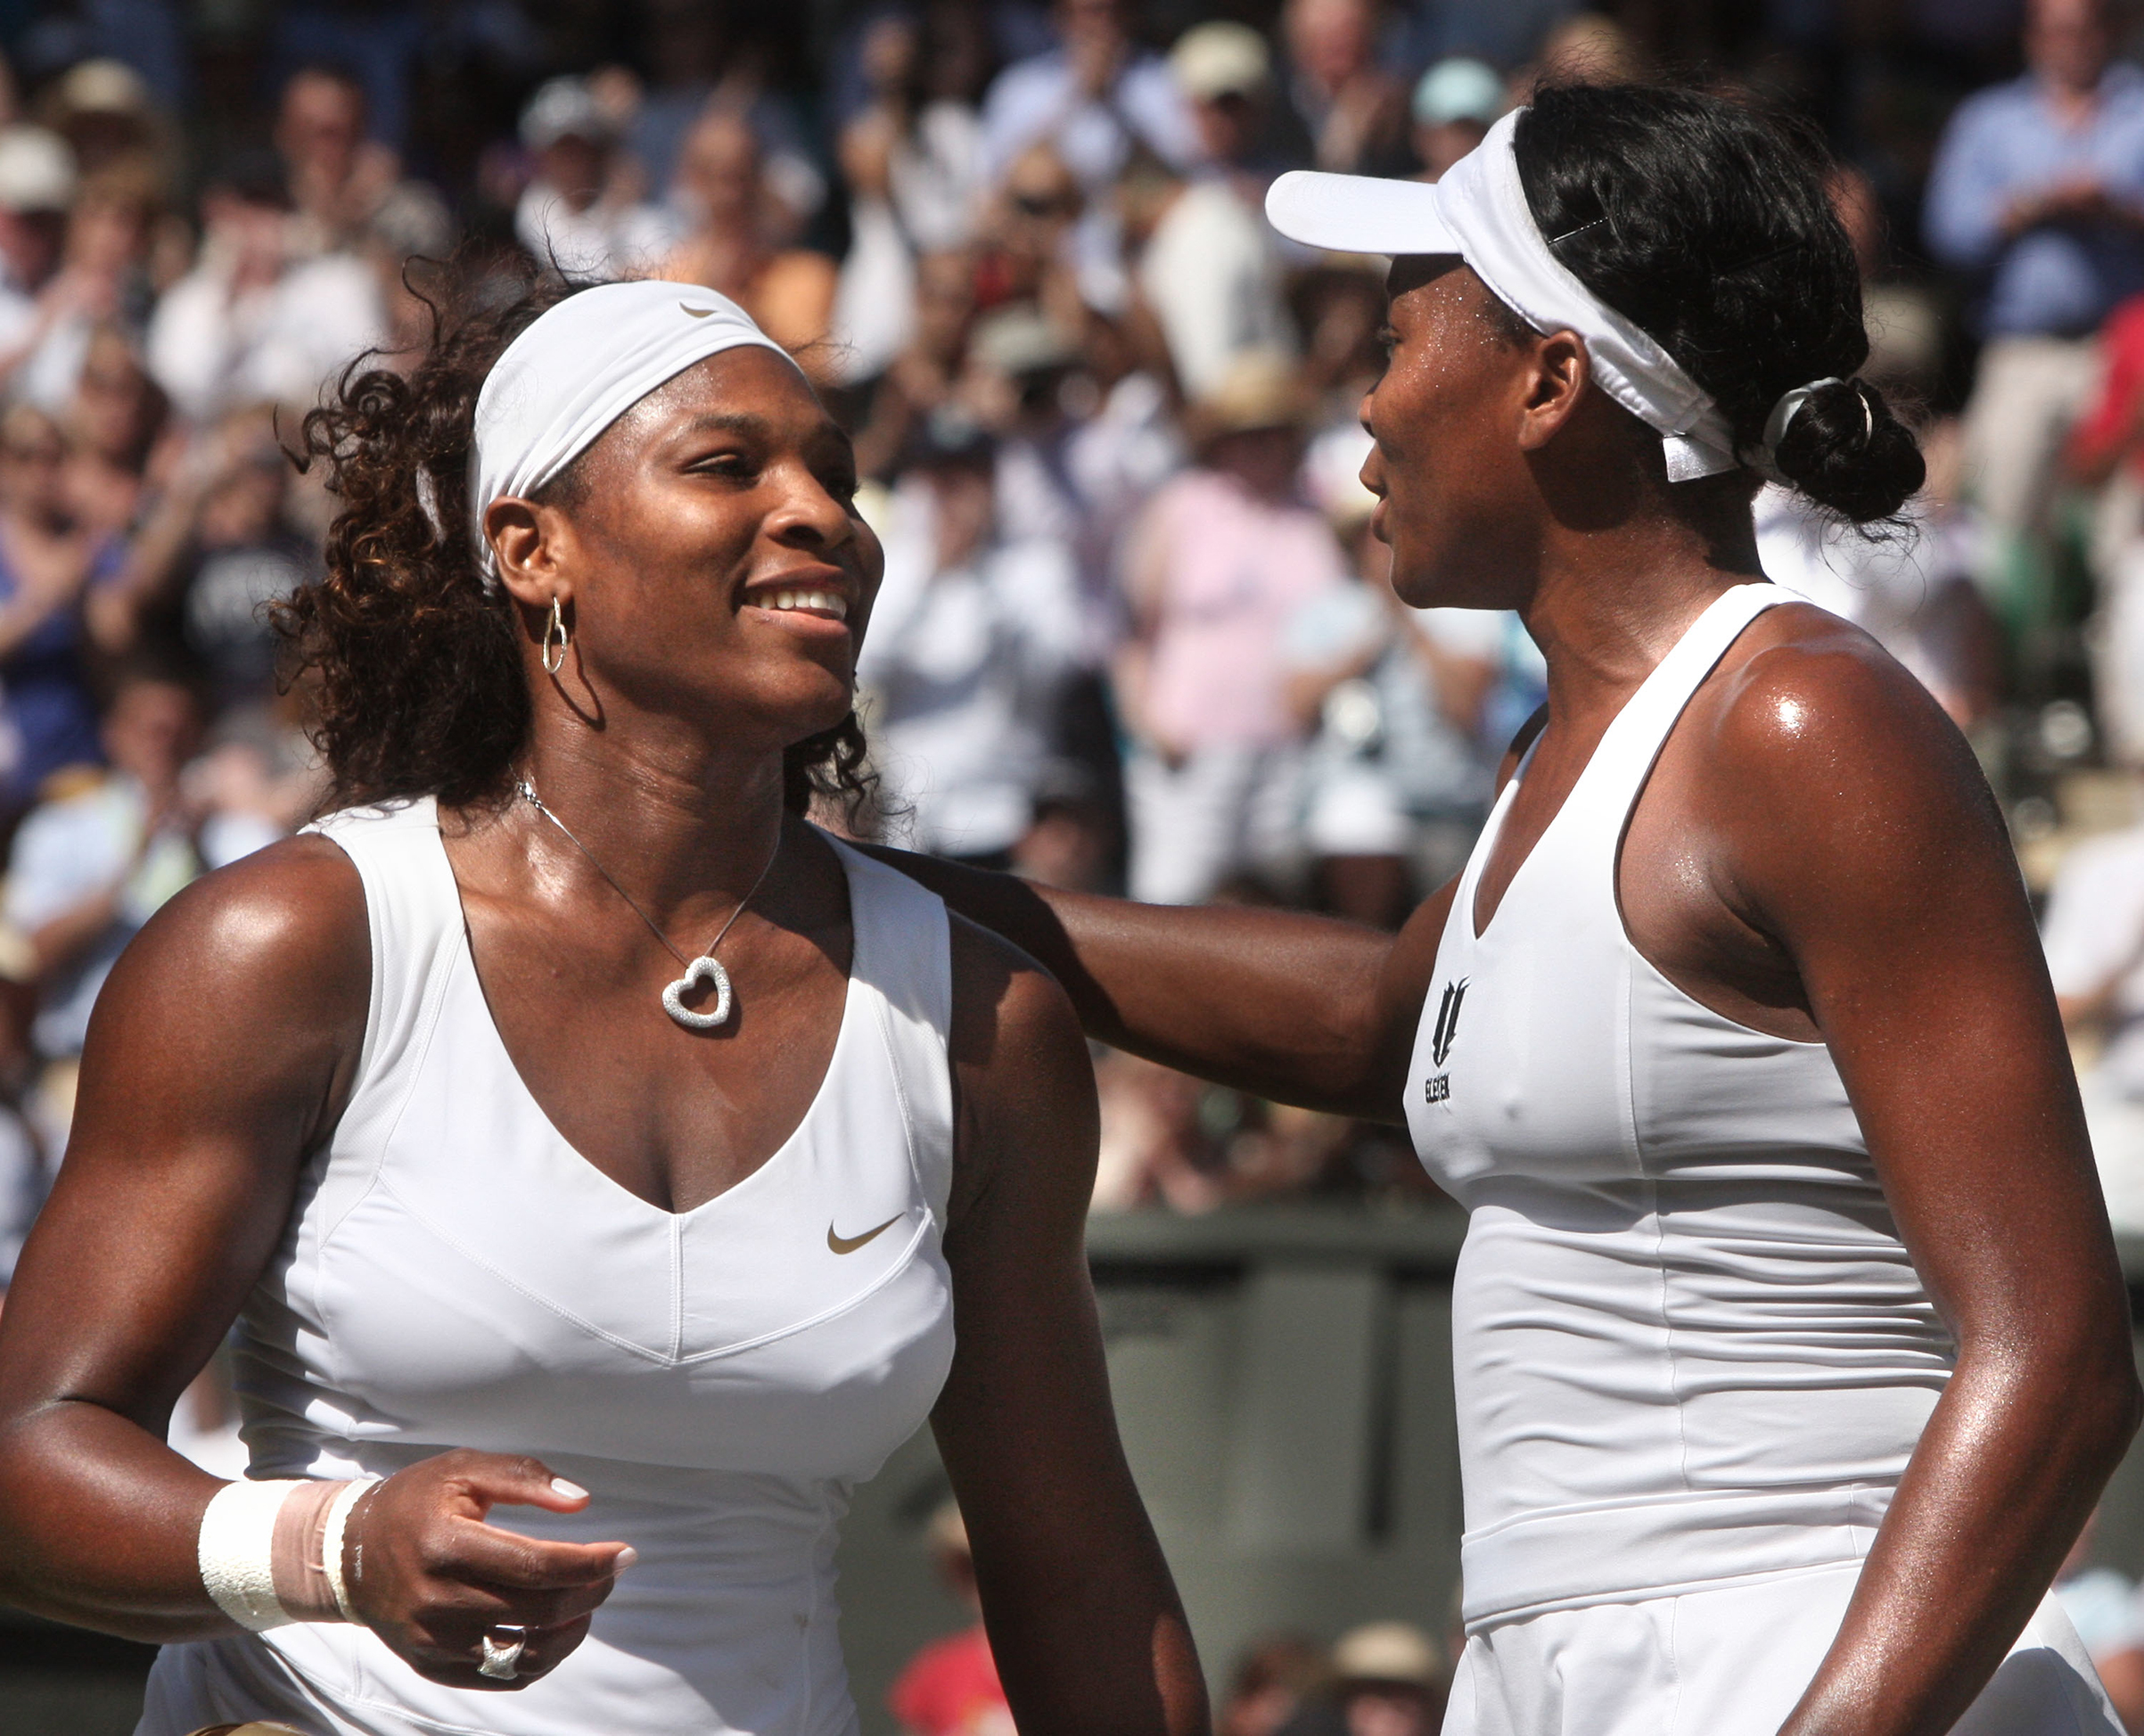 July 4, 2009 Serena Williams her sister Venus meet at the net after Serena defeated Venus 7-6, 6-2 in the final of the Wimbledon Championships at the All England Lawn Tennis Club, Wimbledon, England on Jul, 4 2009. (Cynthia Lum—Icon Sport Media/Corbis/Getty Images)